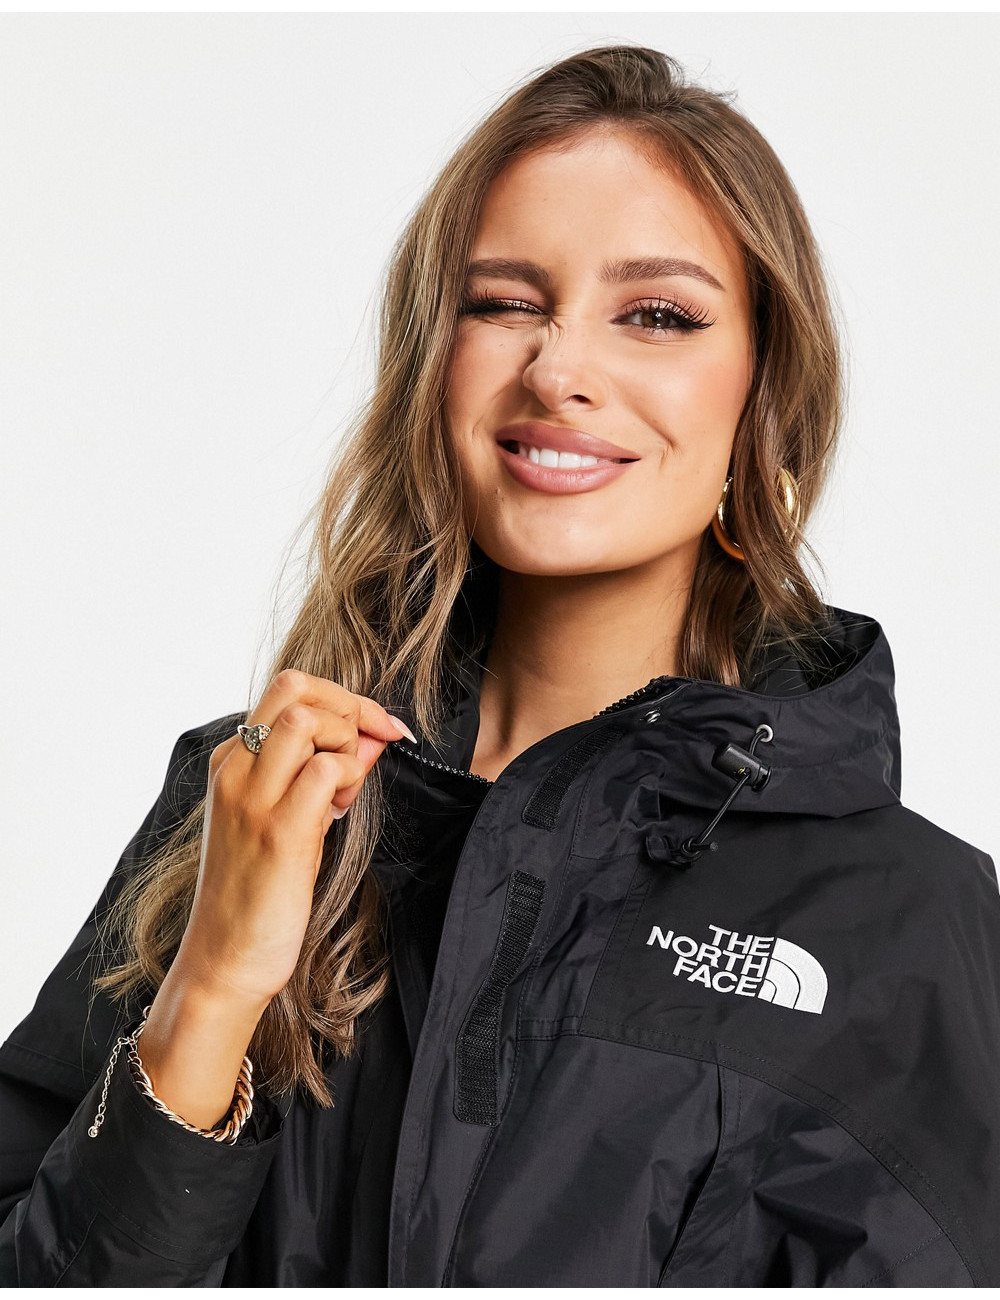 The North Face K2rm jacket...